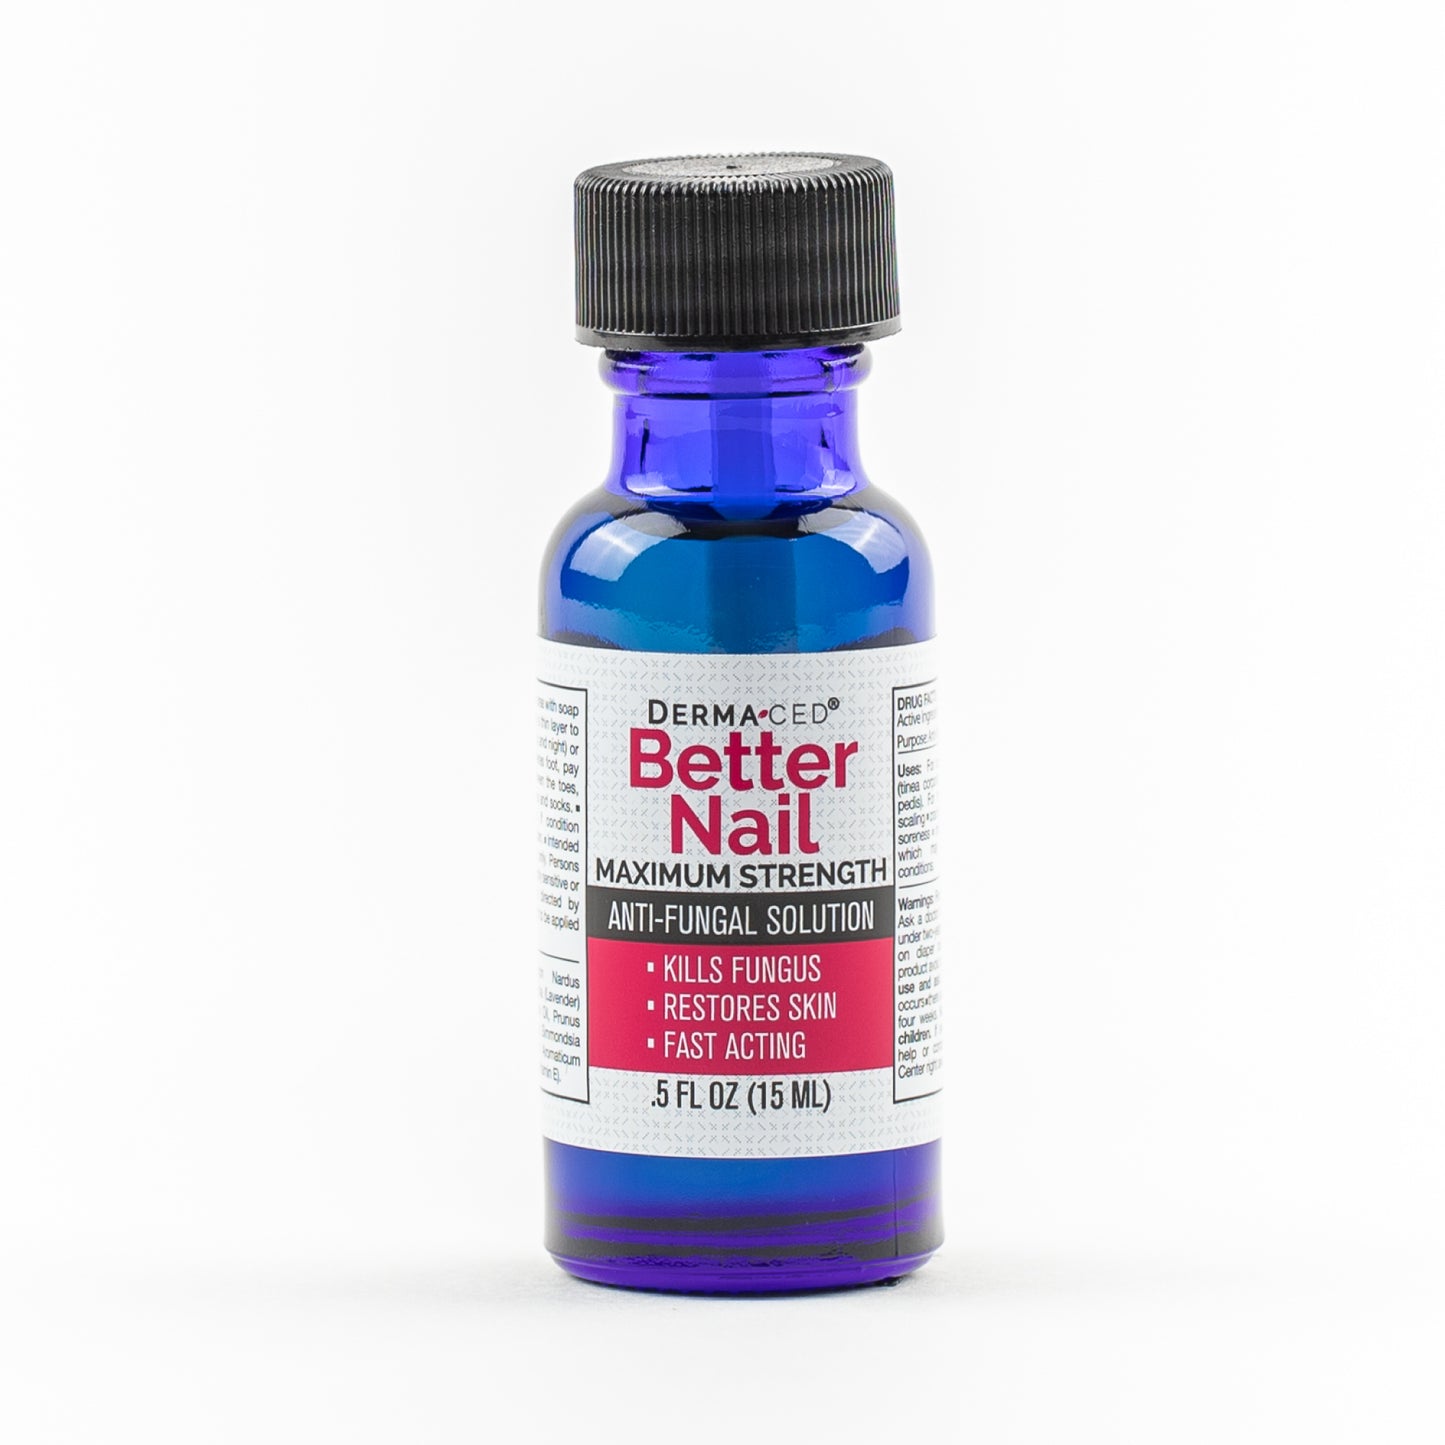 Better Nail - Treatment for Fungus Under & Around the Nail